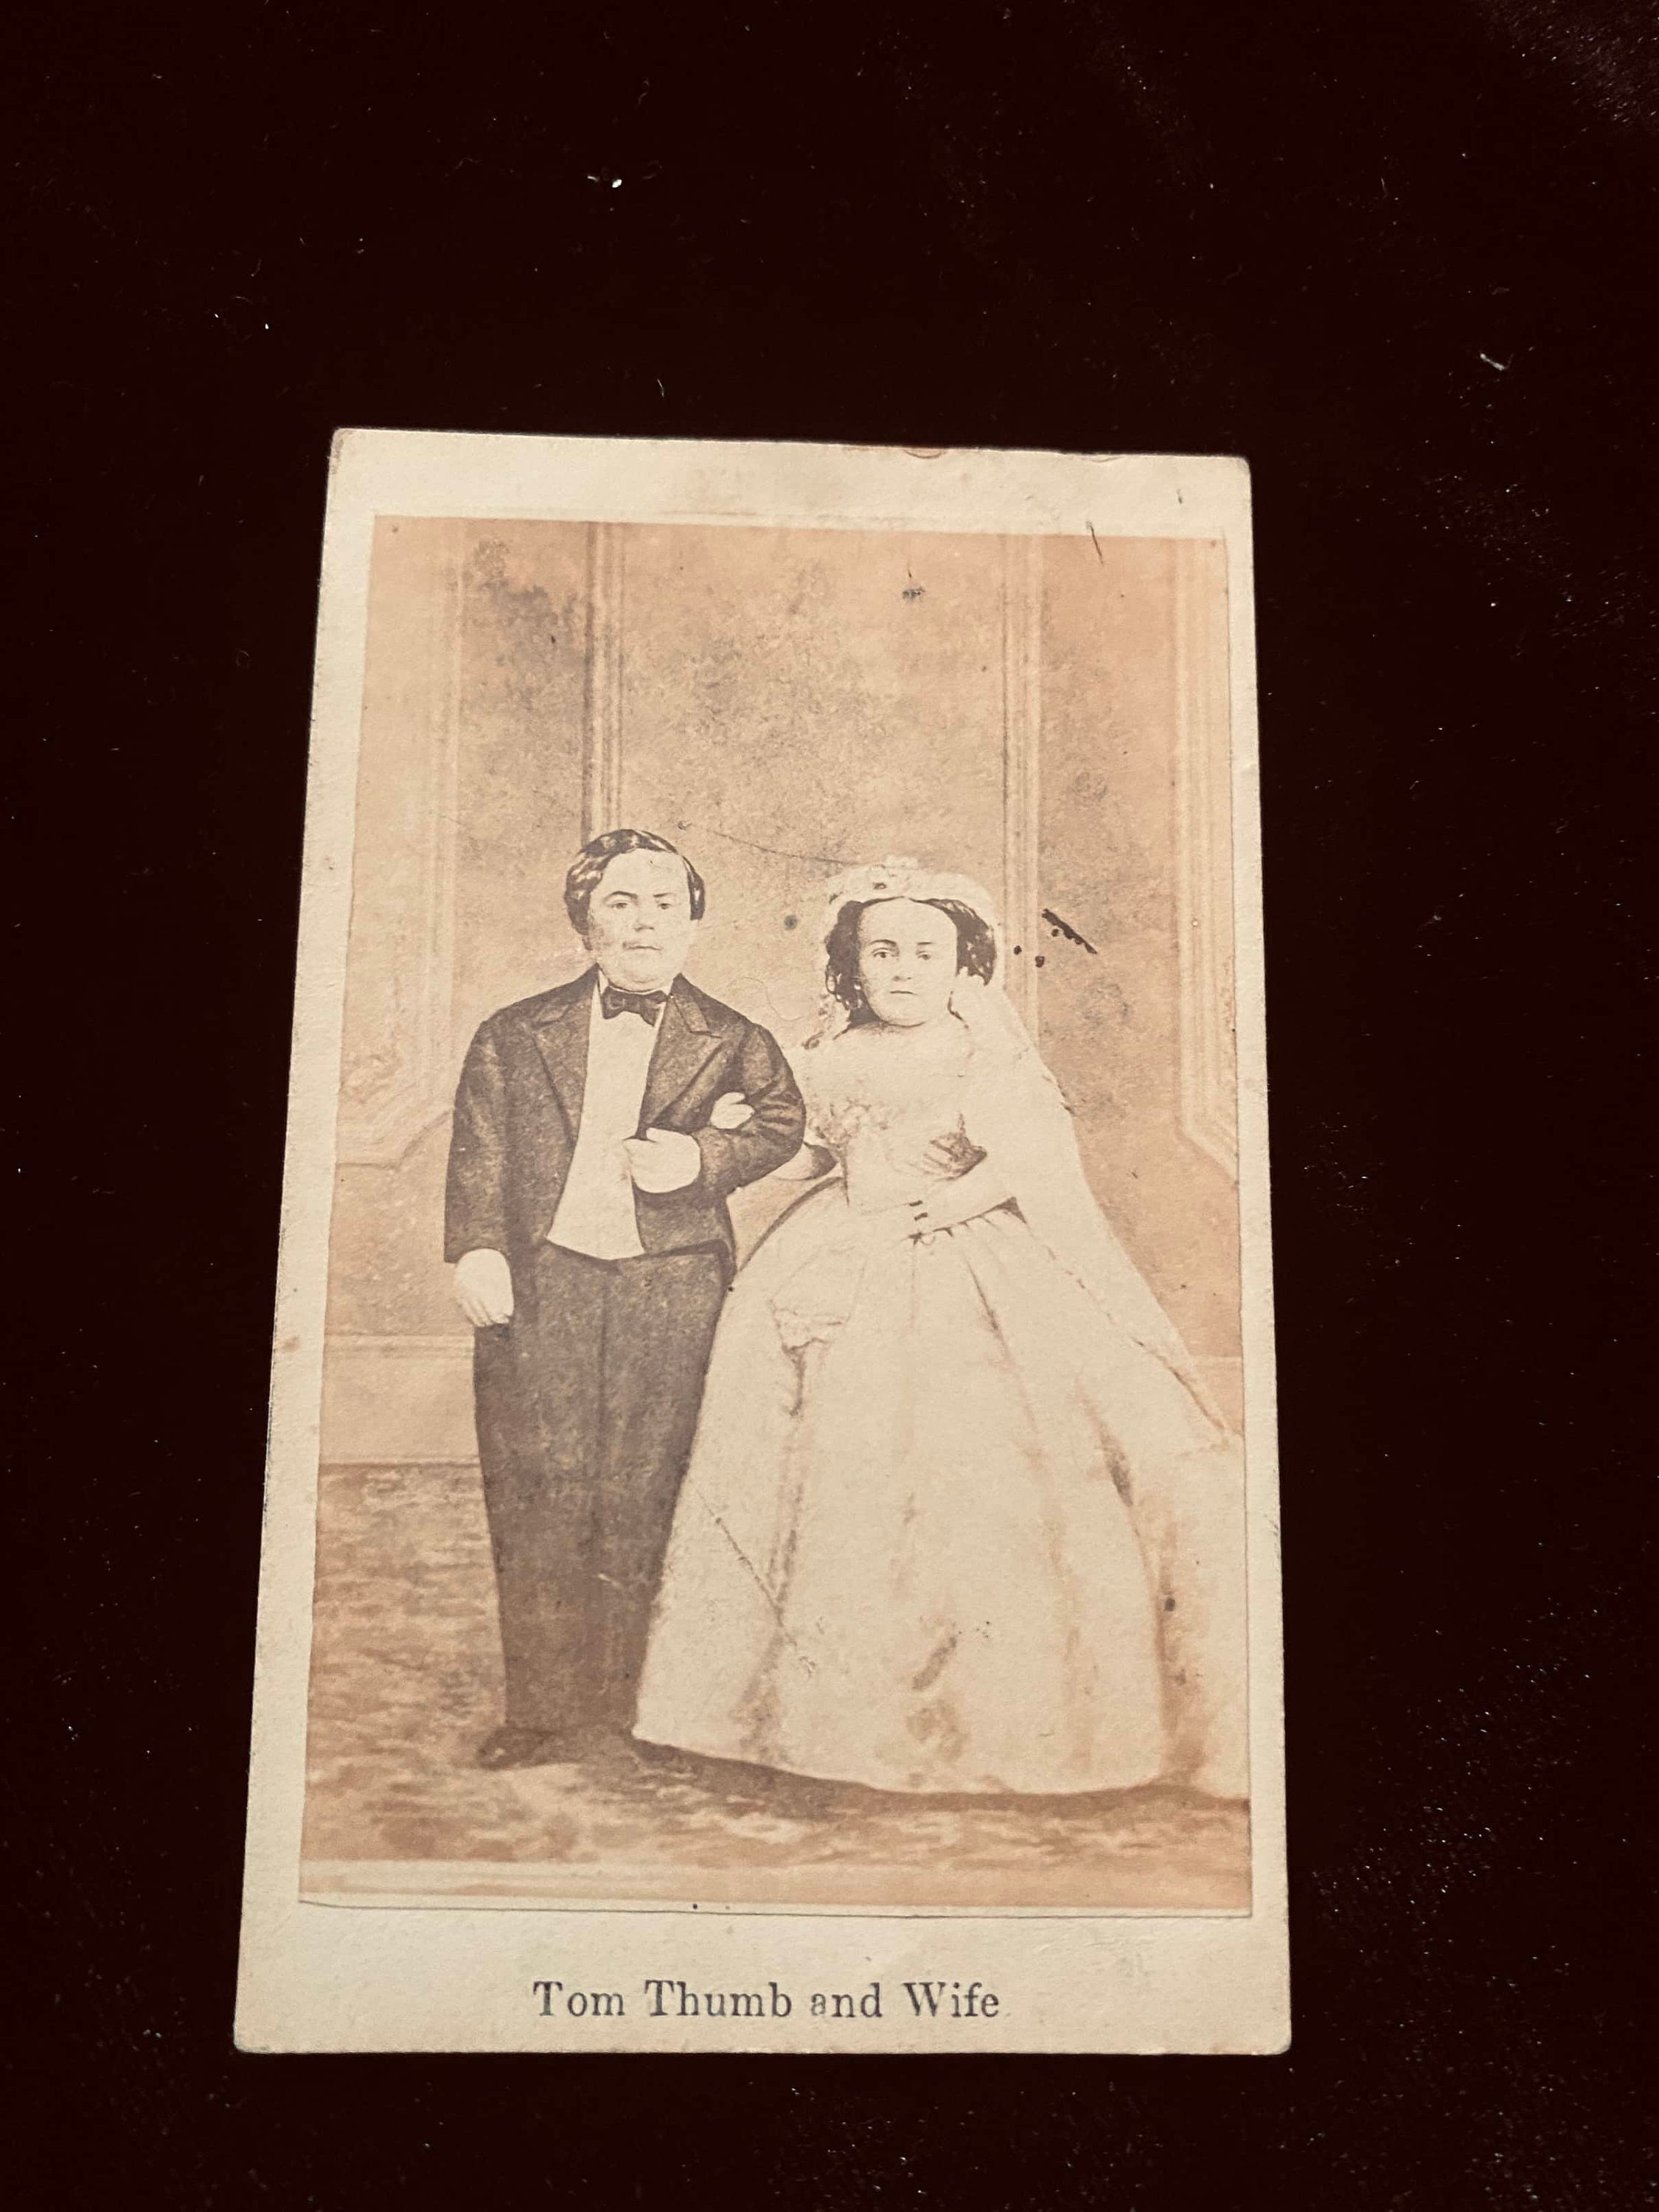 Tom Thumb and Wife